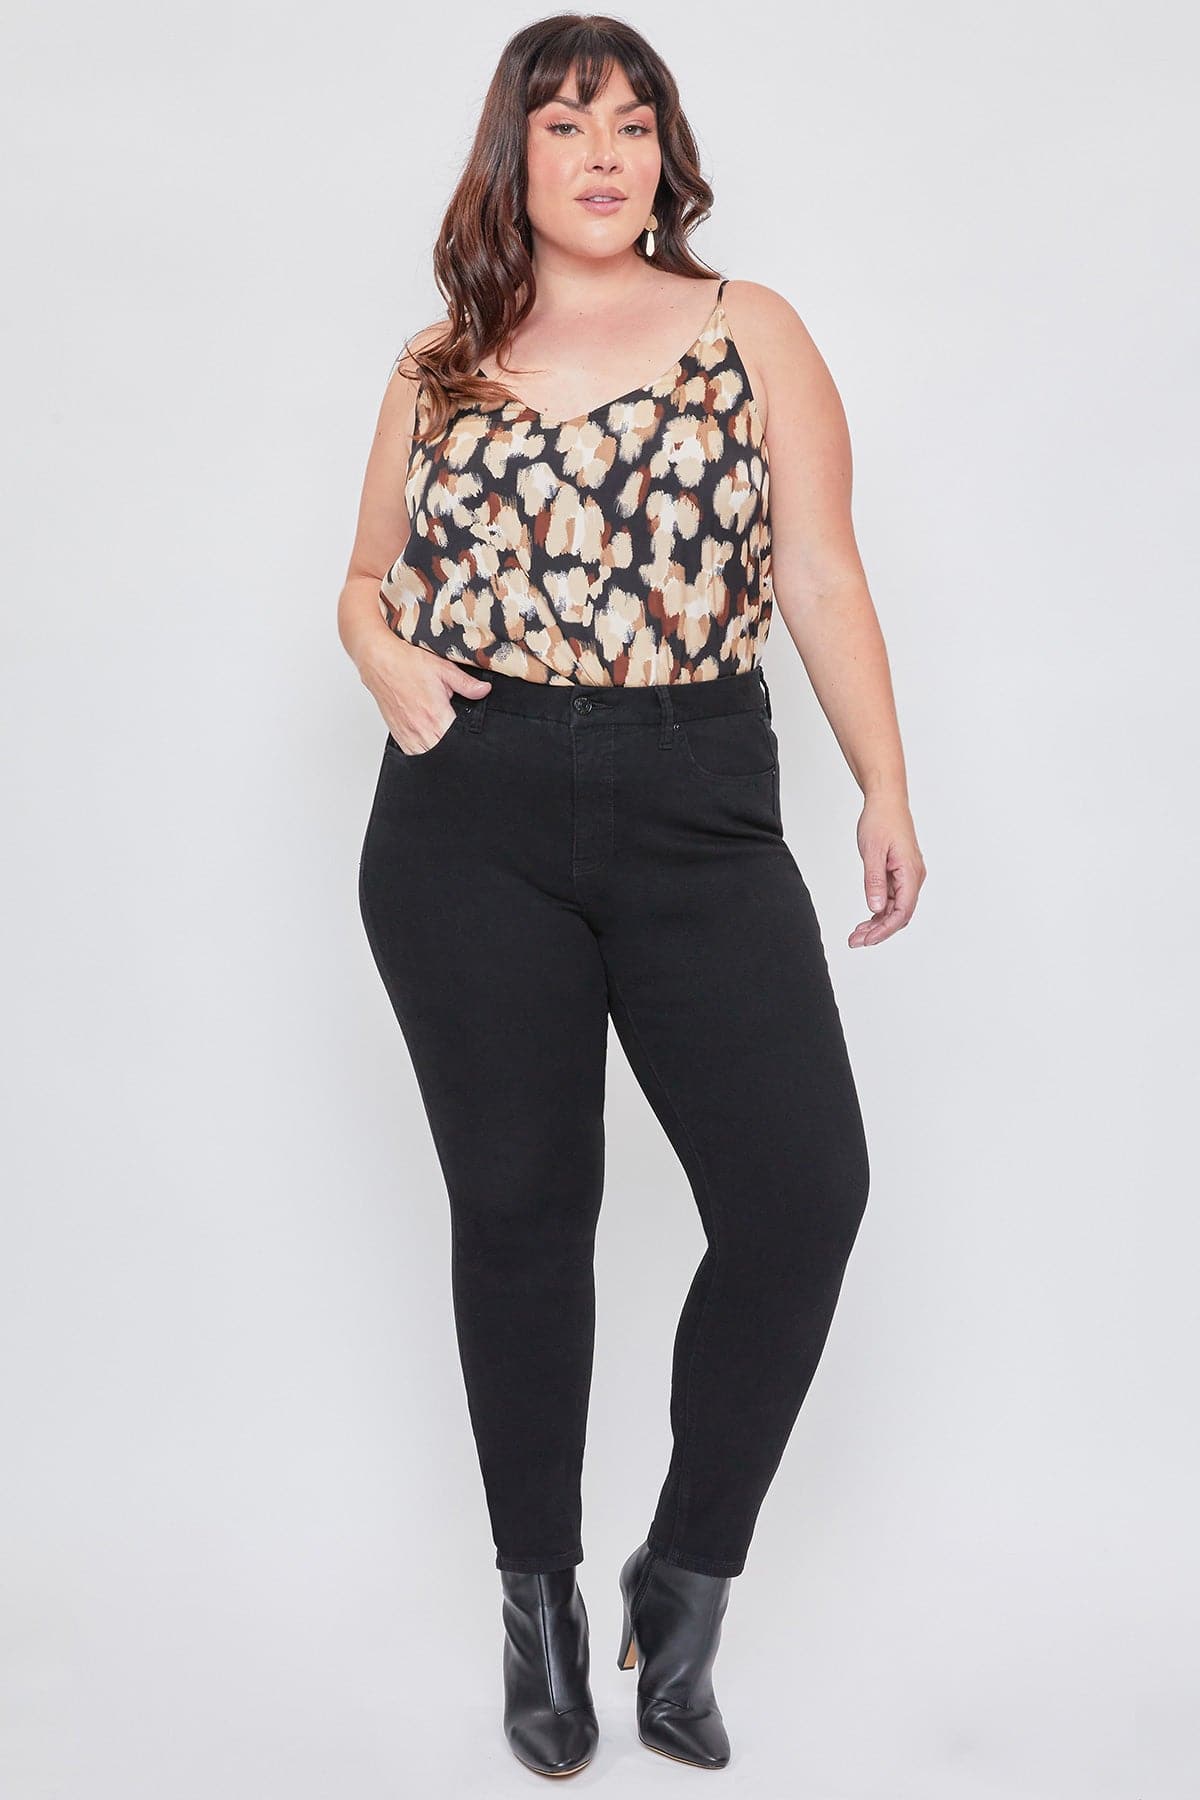 A Hidden Gem - Popsy Clothing Plus Size Review by a Size 32 Blogger -  Wannabe Princess